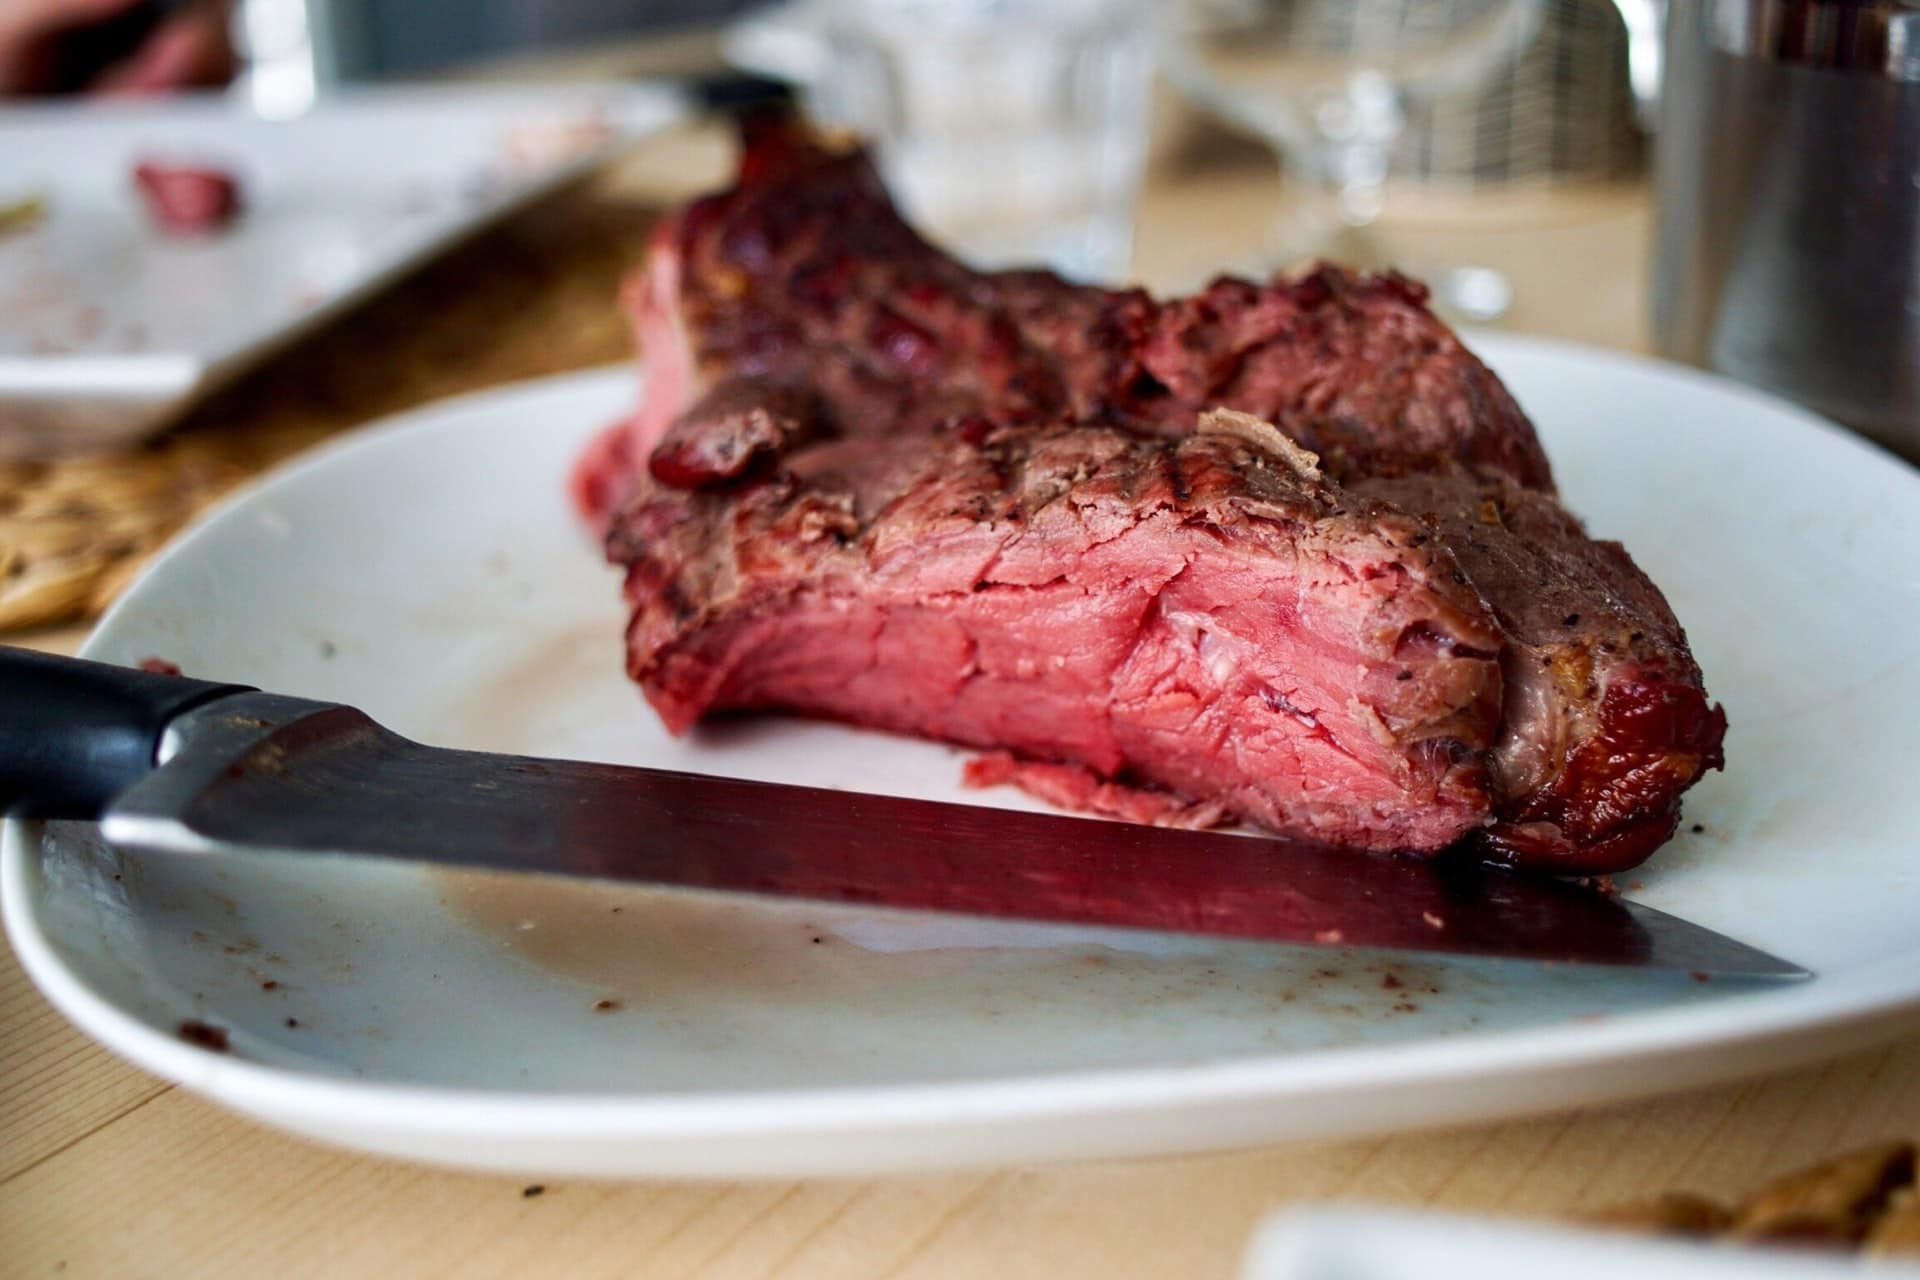 Red meat encourages cancer